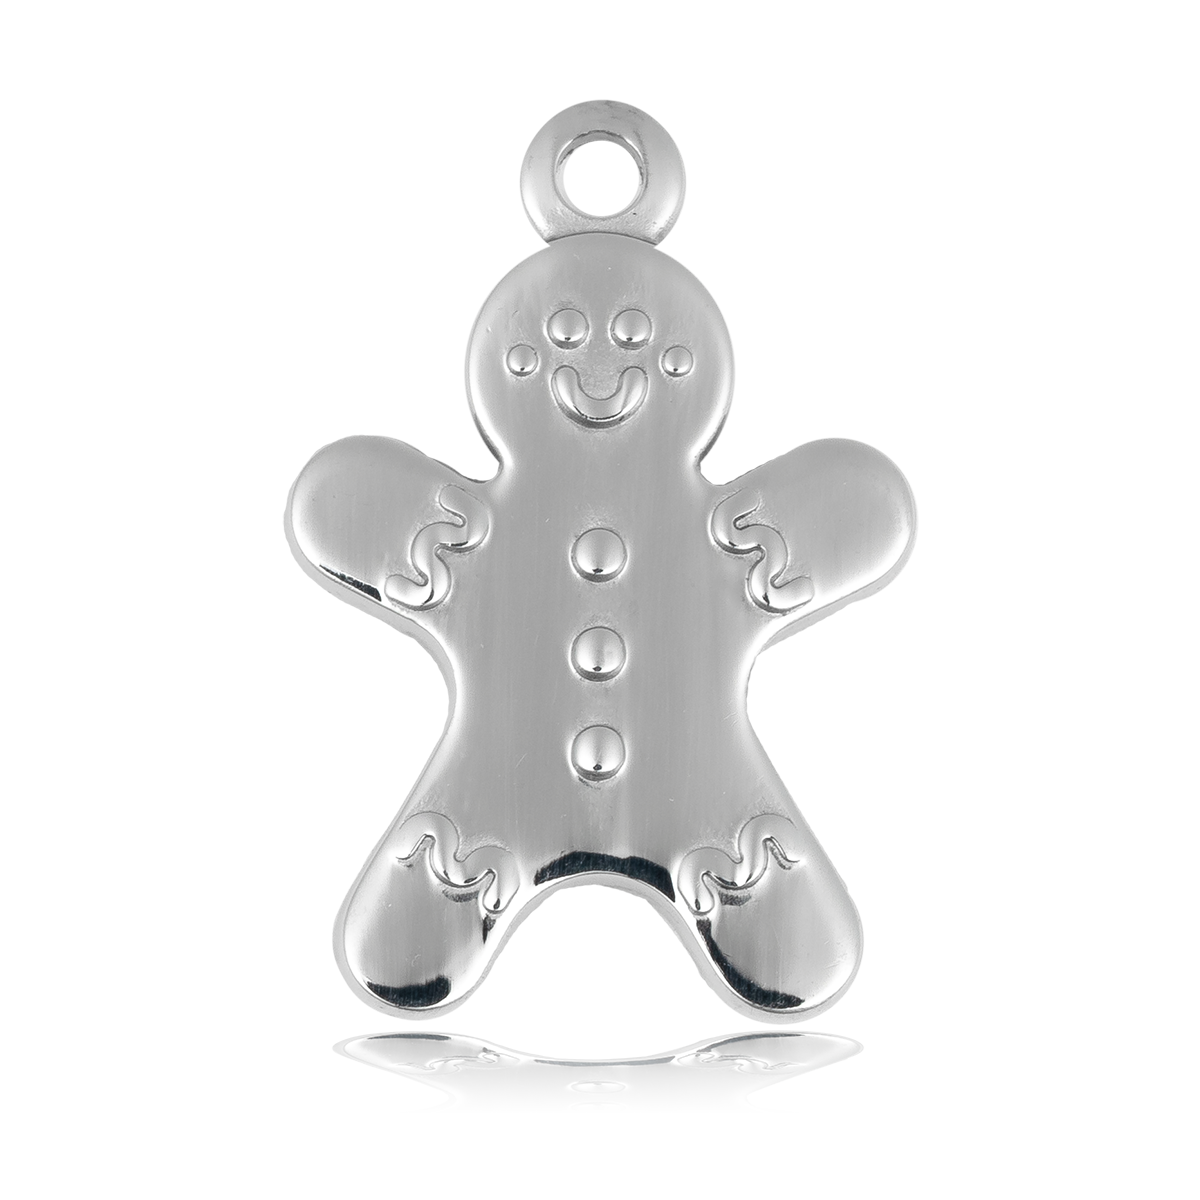 HELP by TJ Gingerbread Man Charm with Caribbean Jade Charity Bracelet